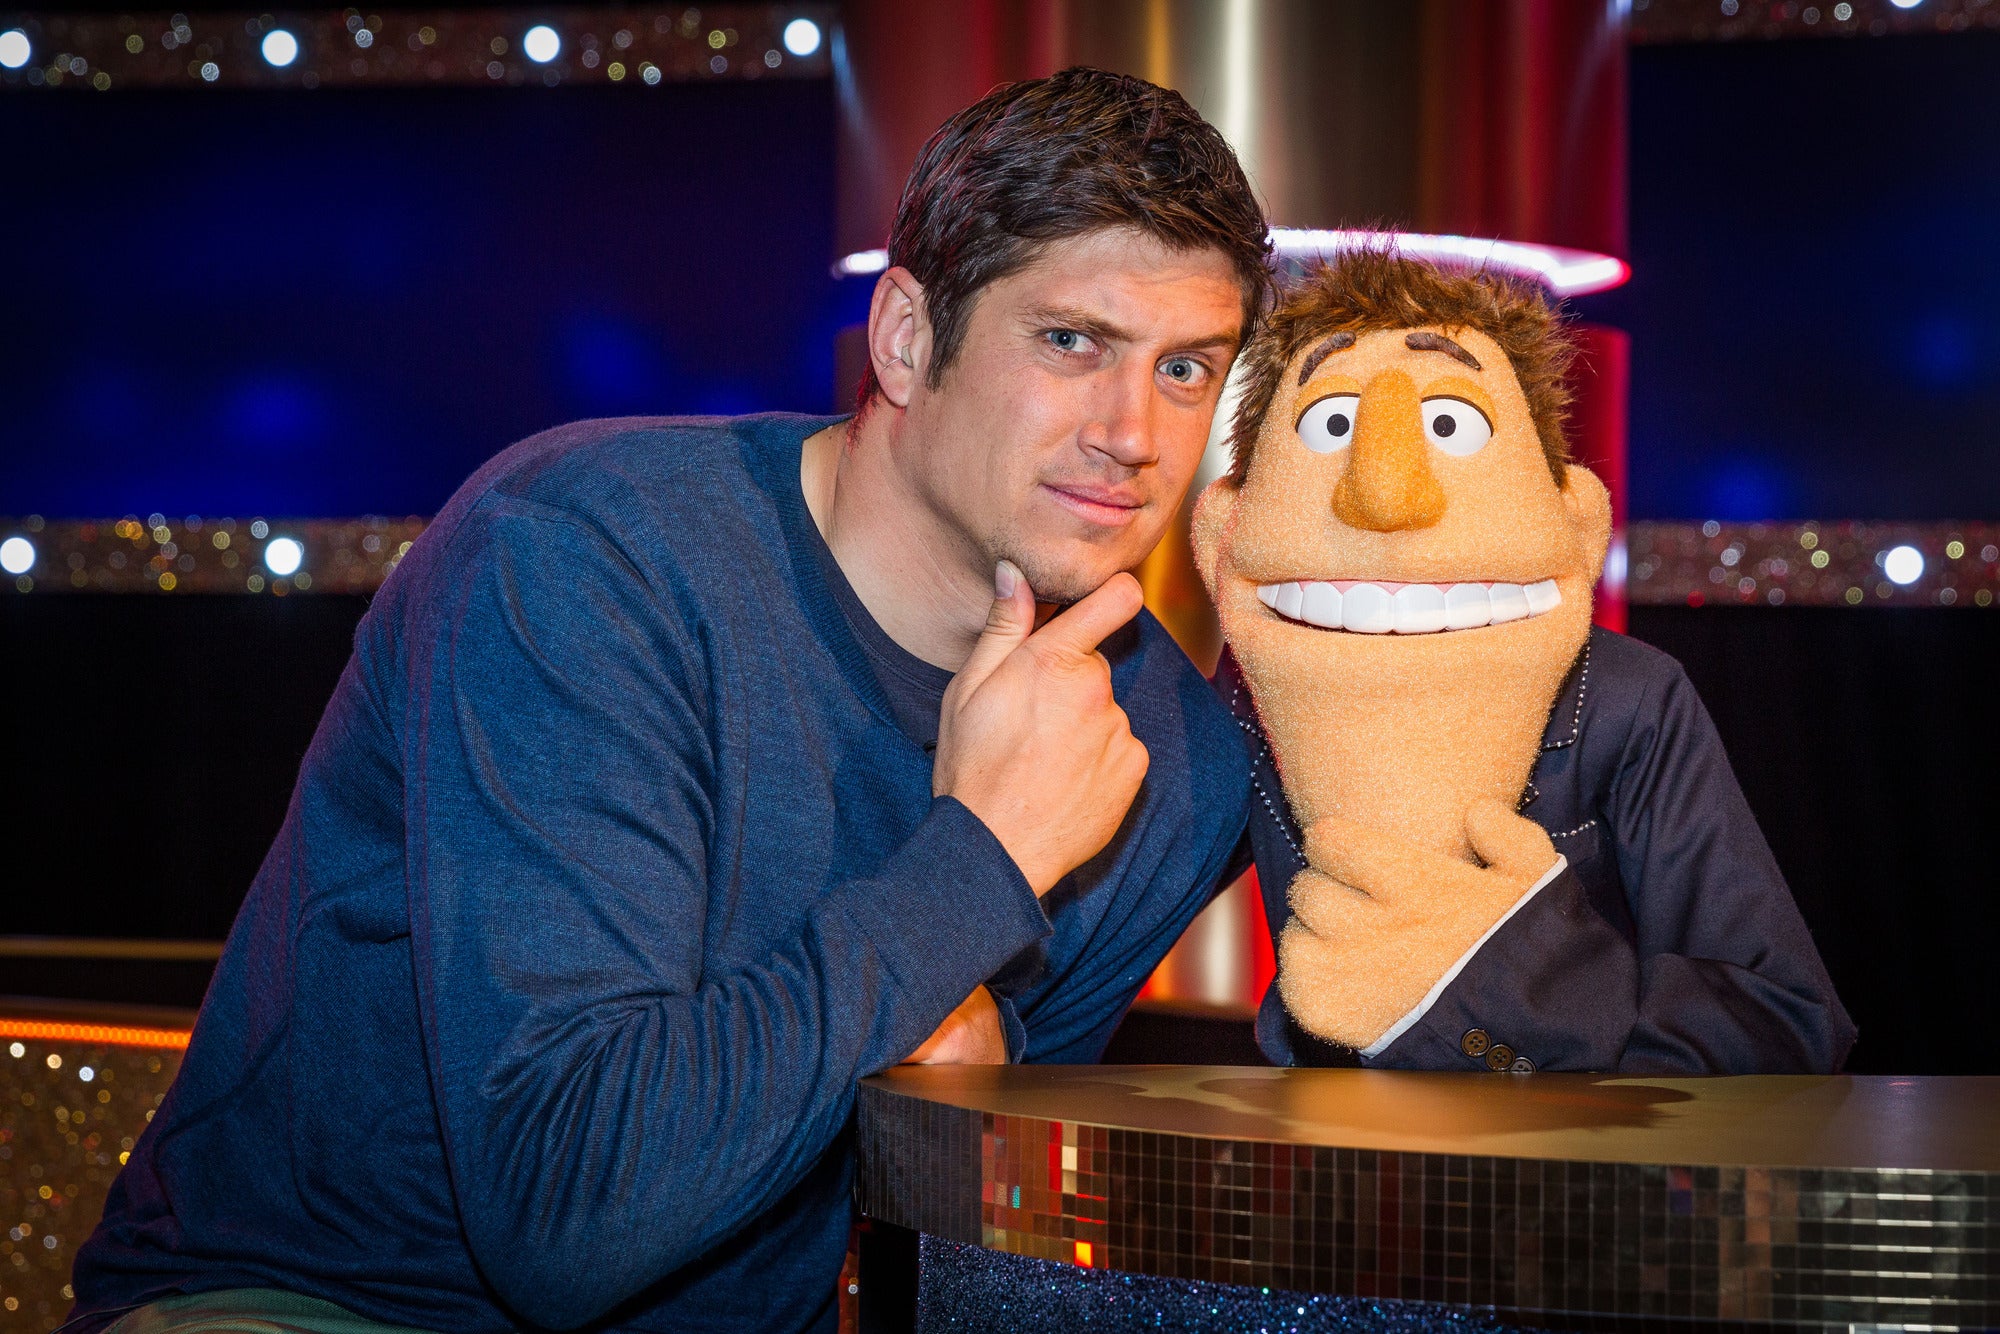 Separated at birth? Vernon Kay and Dougie Colon